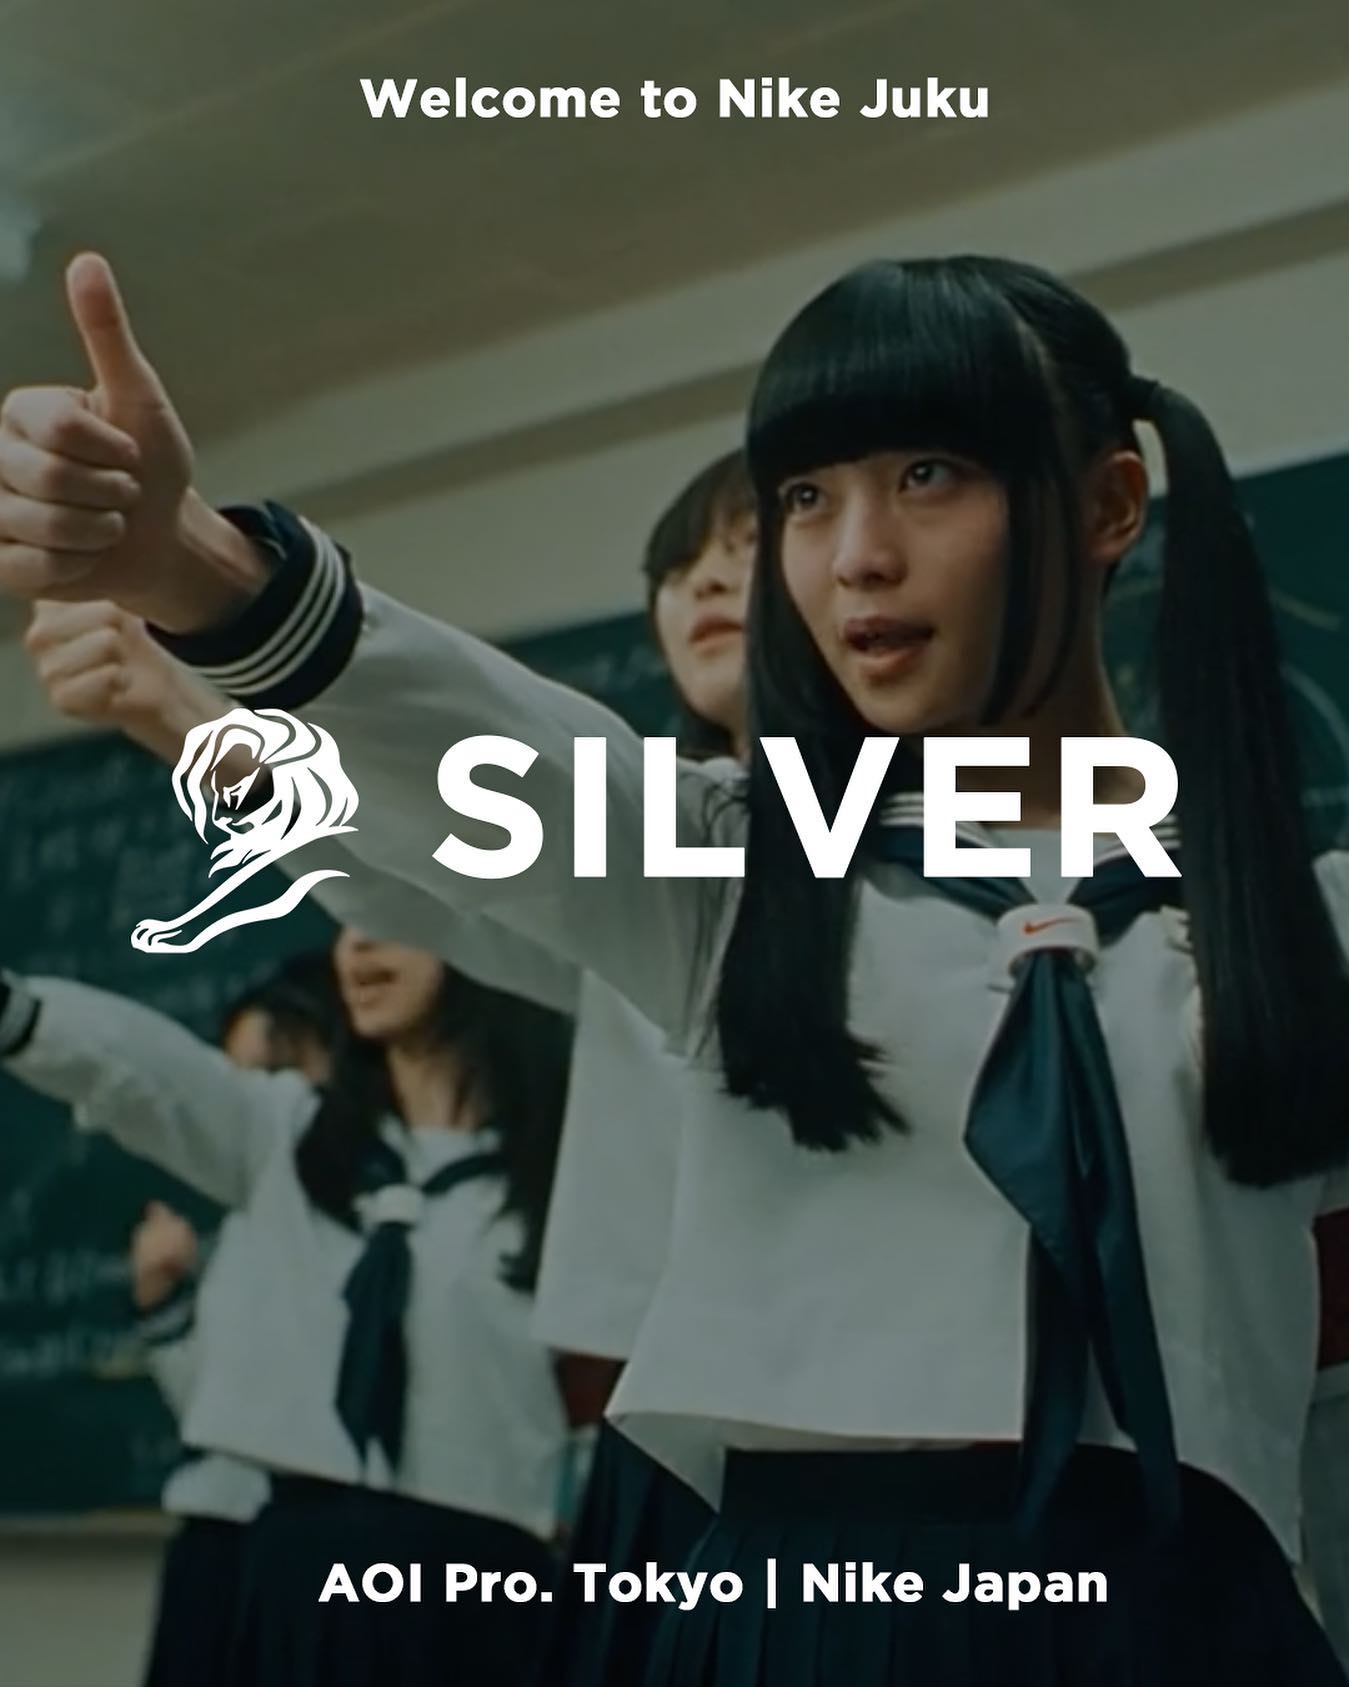 We are thrilled to announce that "WOO! GO! by Atarashii Gakkou" for NIKE Japan was awarded a SILVER LION at Cannes Lions 2023

A remarkable achievement showcasing the magic that AOI Pro. brings to the screen. 
We extend our heartfelt congratulations to everyone who contributed to the success of this work! 

“Nike Japan "WOO! GO! by Atarashii Gakkou"
SILVER LION🥈 Film Category - Social Behaviour
SHORTLIST🎗 Film Category - Cultural Insight

@cannes_lions @niketokyo @aoiglobal @wktokyo 

ATARASHII GAKKO! : @mizyu_leaders @suzuka_leaders @rin_leaders @kanon_leaders 
Director: @mackshepp 
Director of Photography: @_mikul